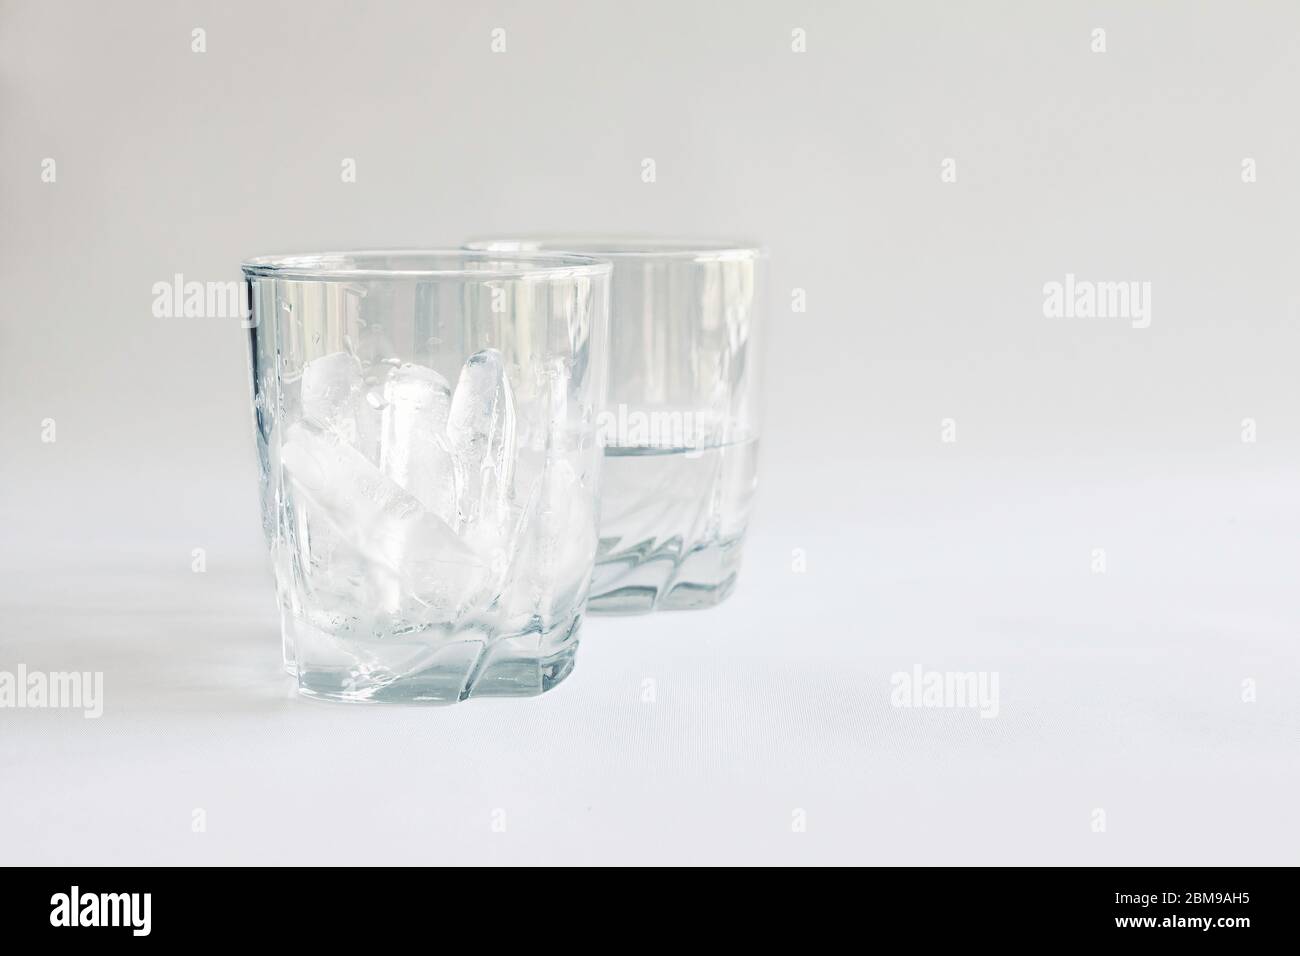 Tumbler full of ice with a second glass half full of water (ice melted), Virginia, United States, color Stock Photo